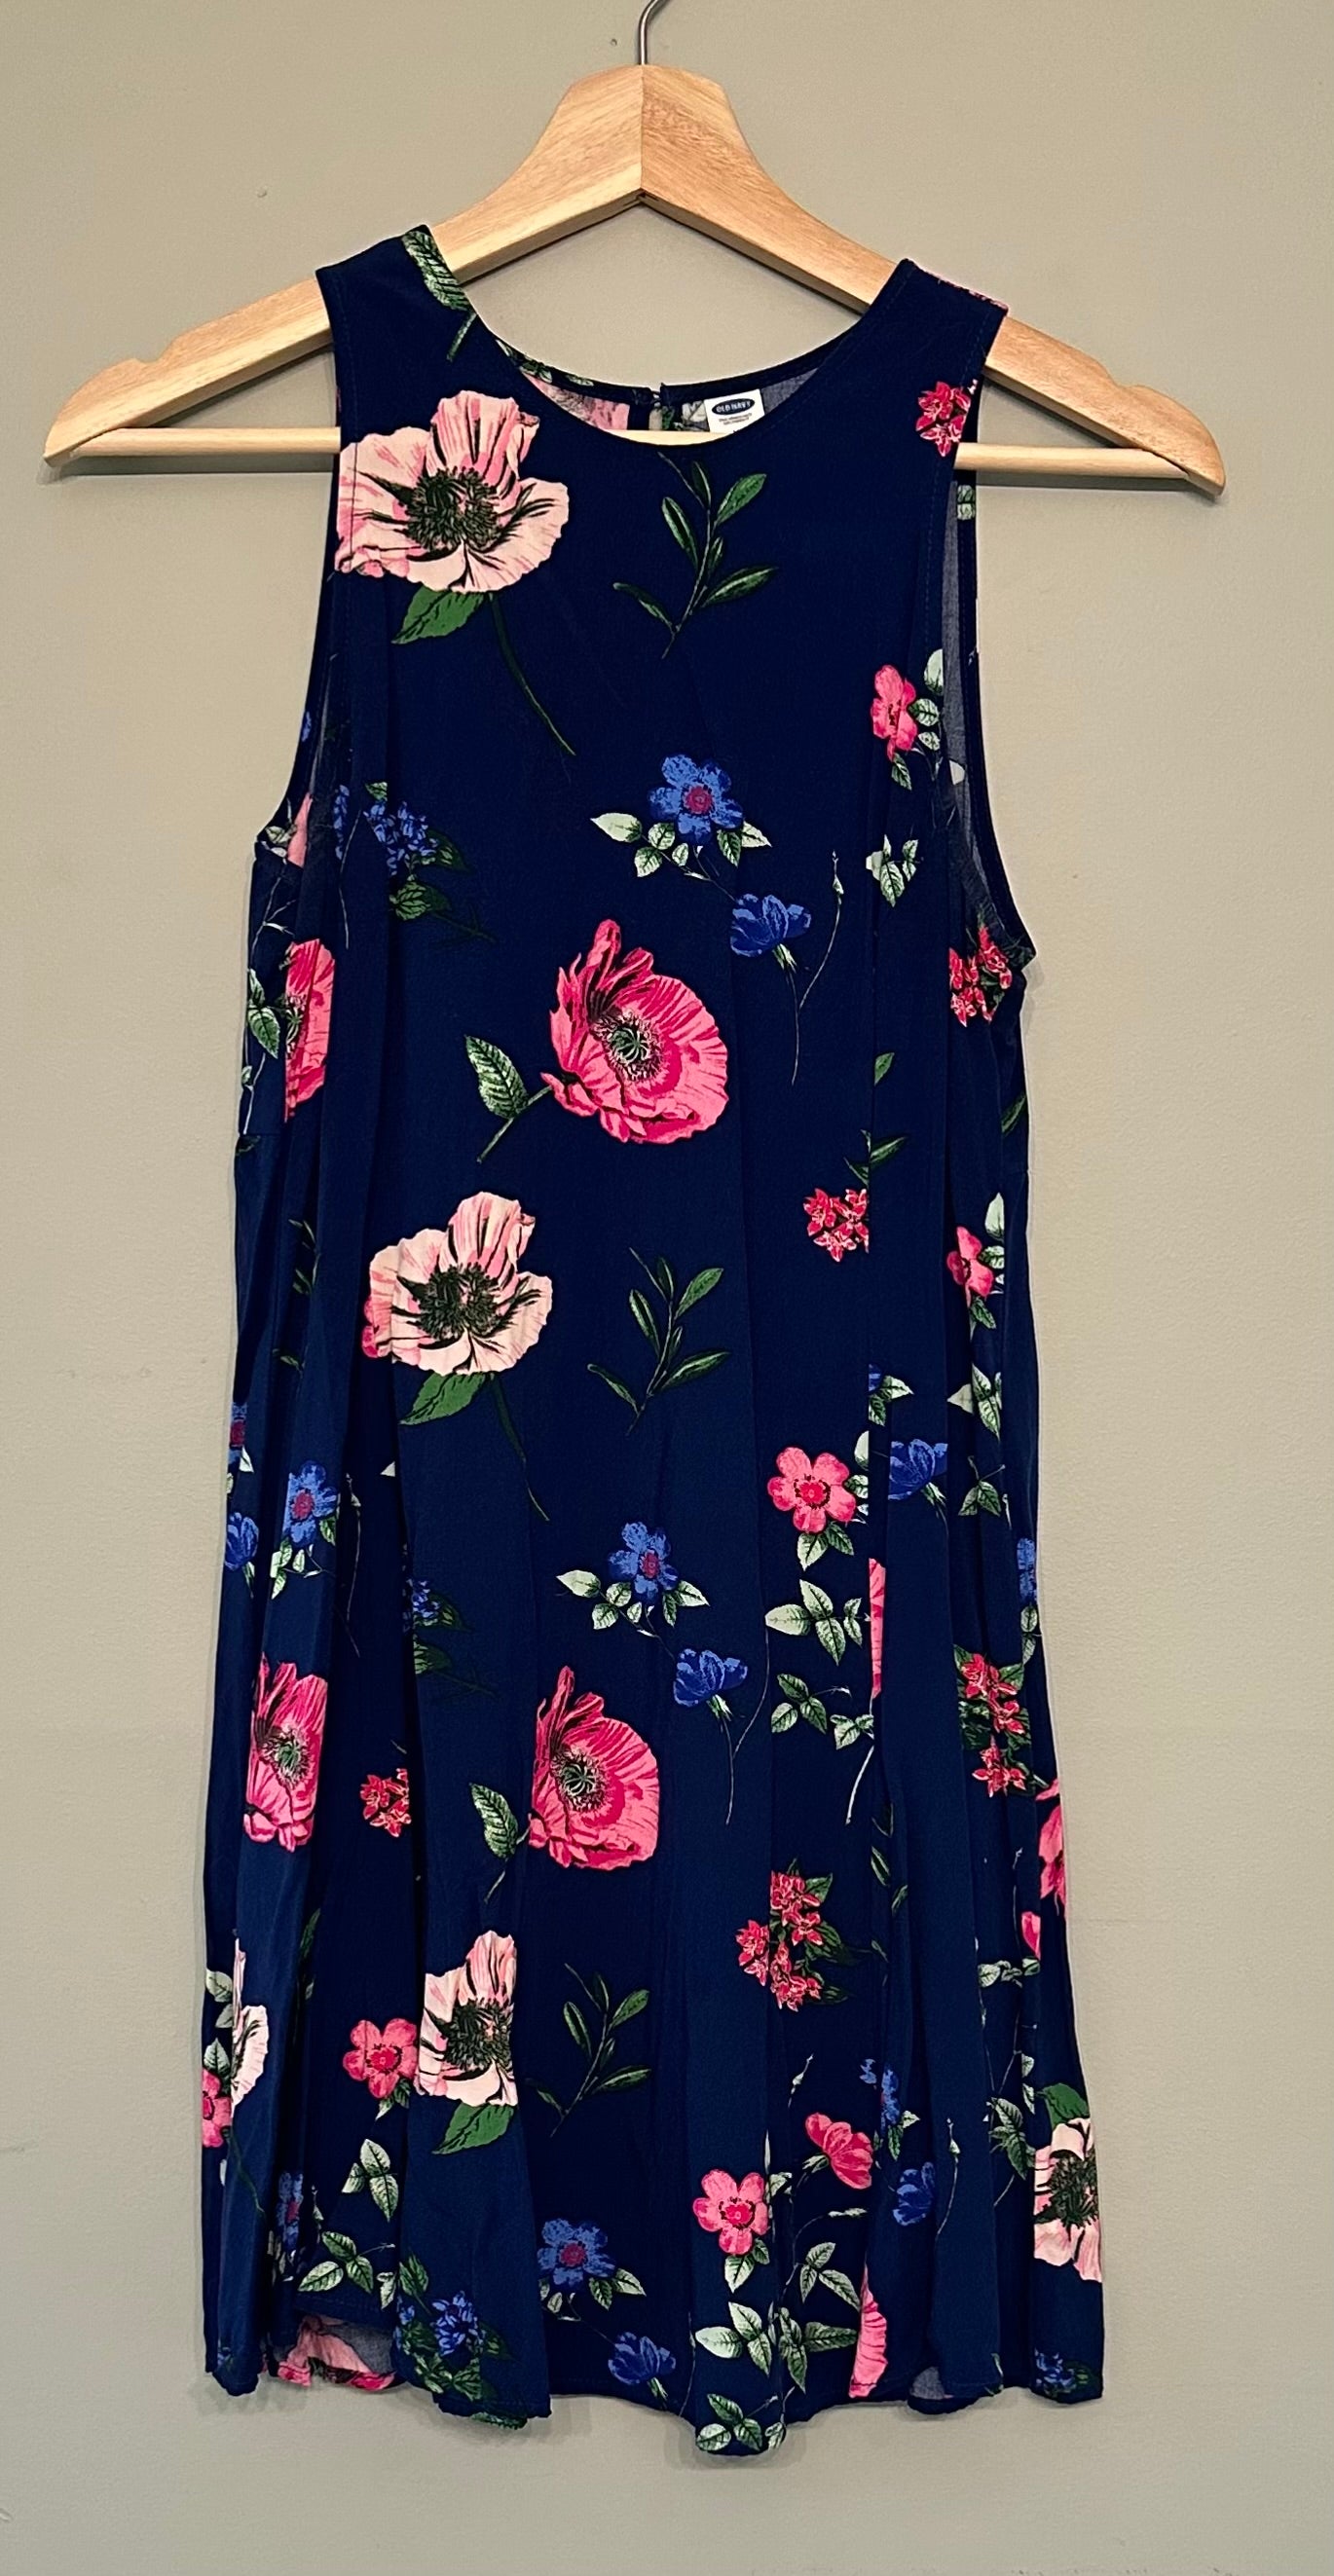 Old Navy Women’s XS Navy Floral Dress